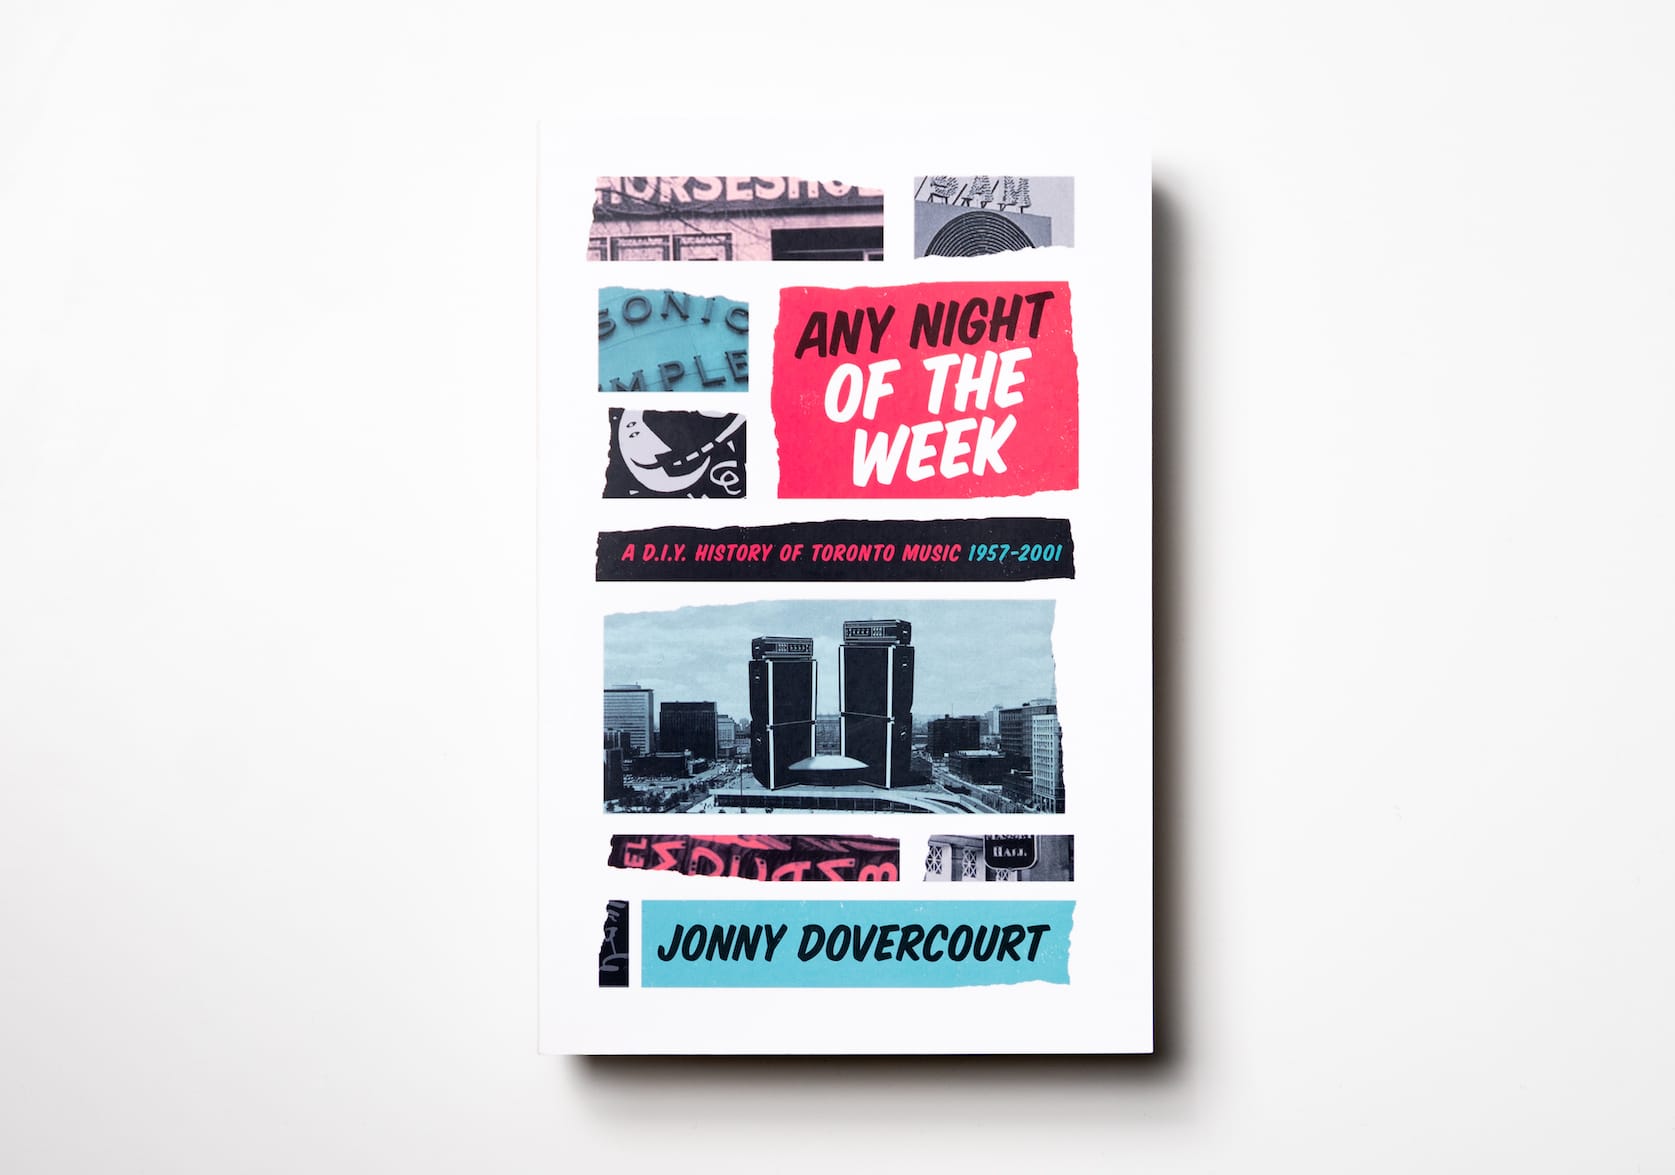 Any Night of the Week by Jonny Dovercourt. A D.I.Y. History of Toronto Music 1957 - 2001